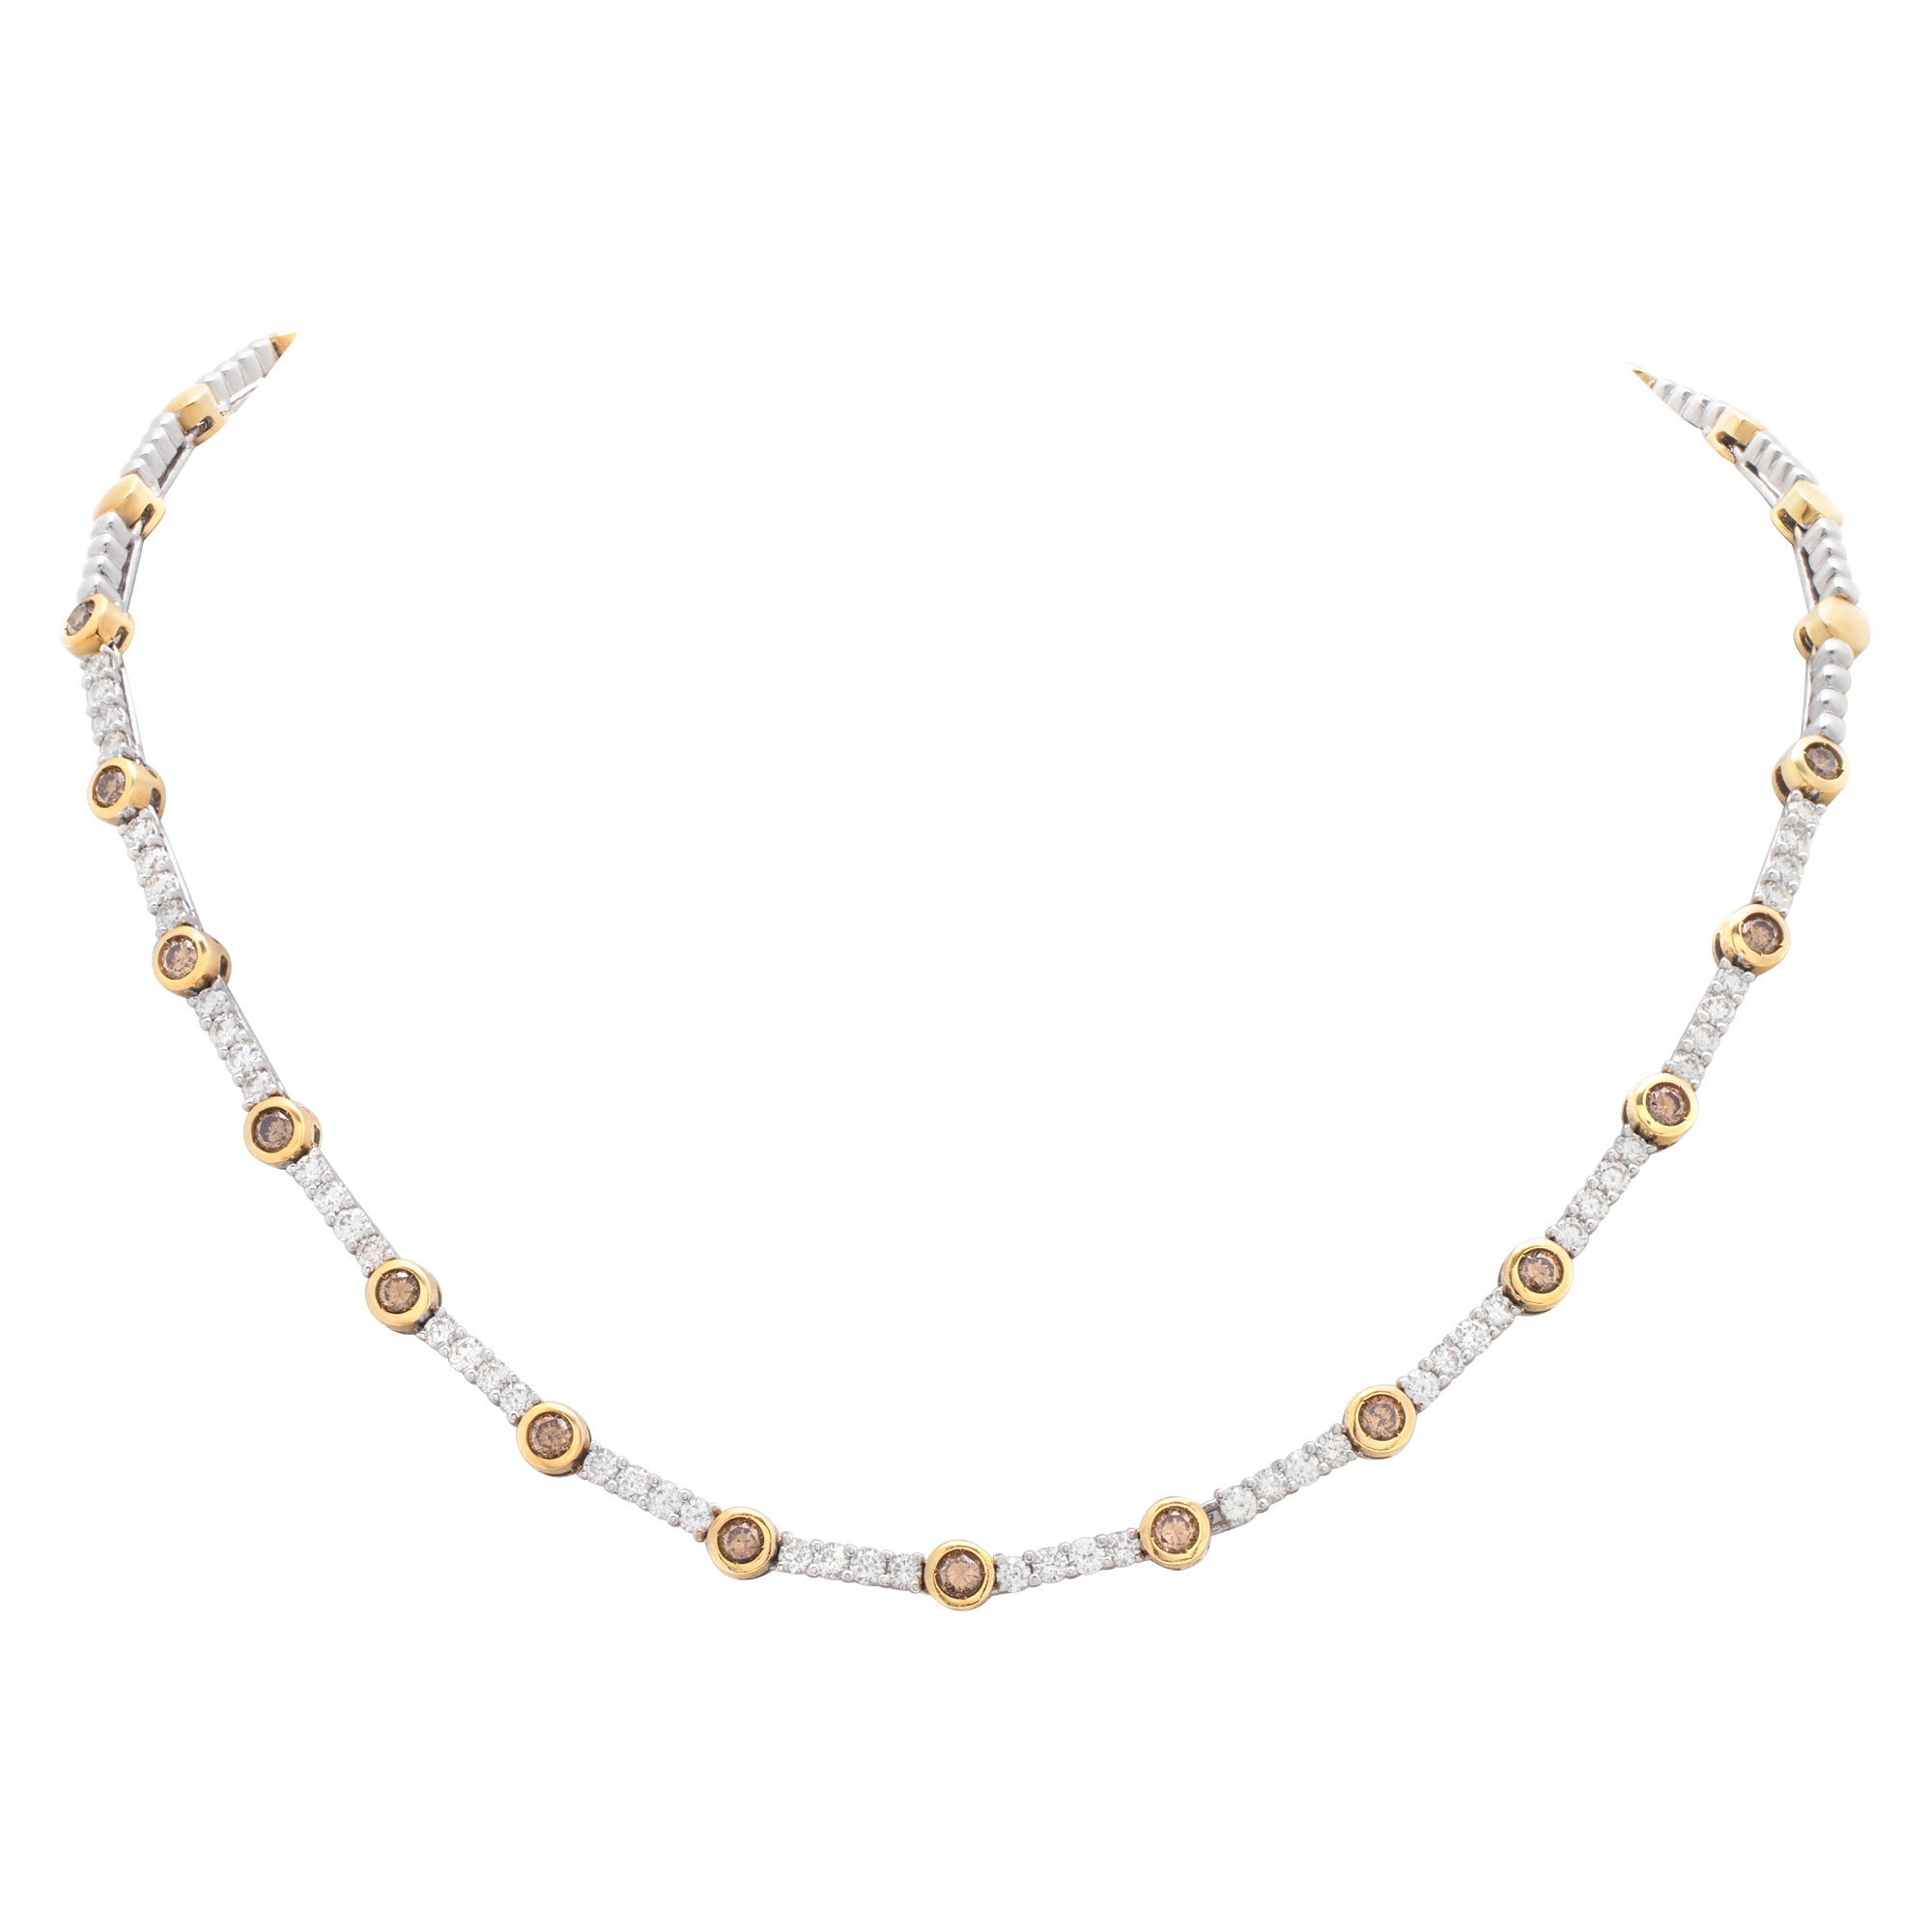 Stunning 18k white and yellow gold necklace with white and yellow diamonds image 1